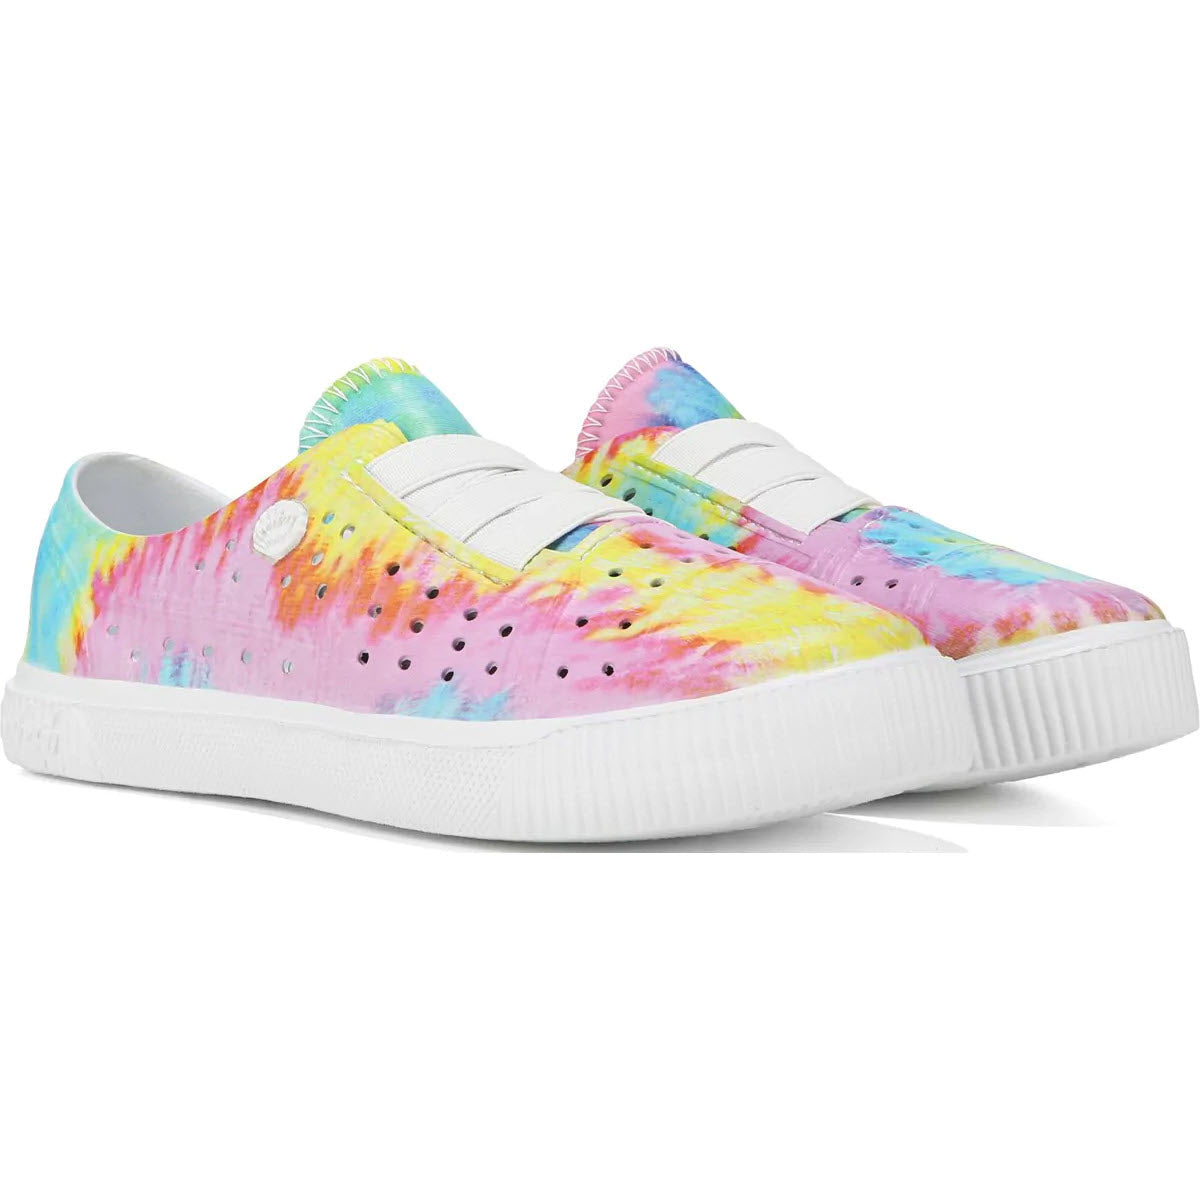 A pair of colorful tie-dye Blowfish Rio Slip On sneakers with white soles, straps, and a cushioned insole.